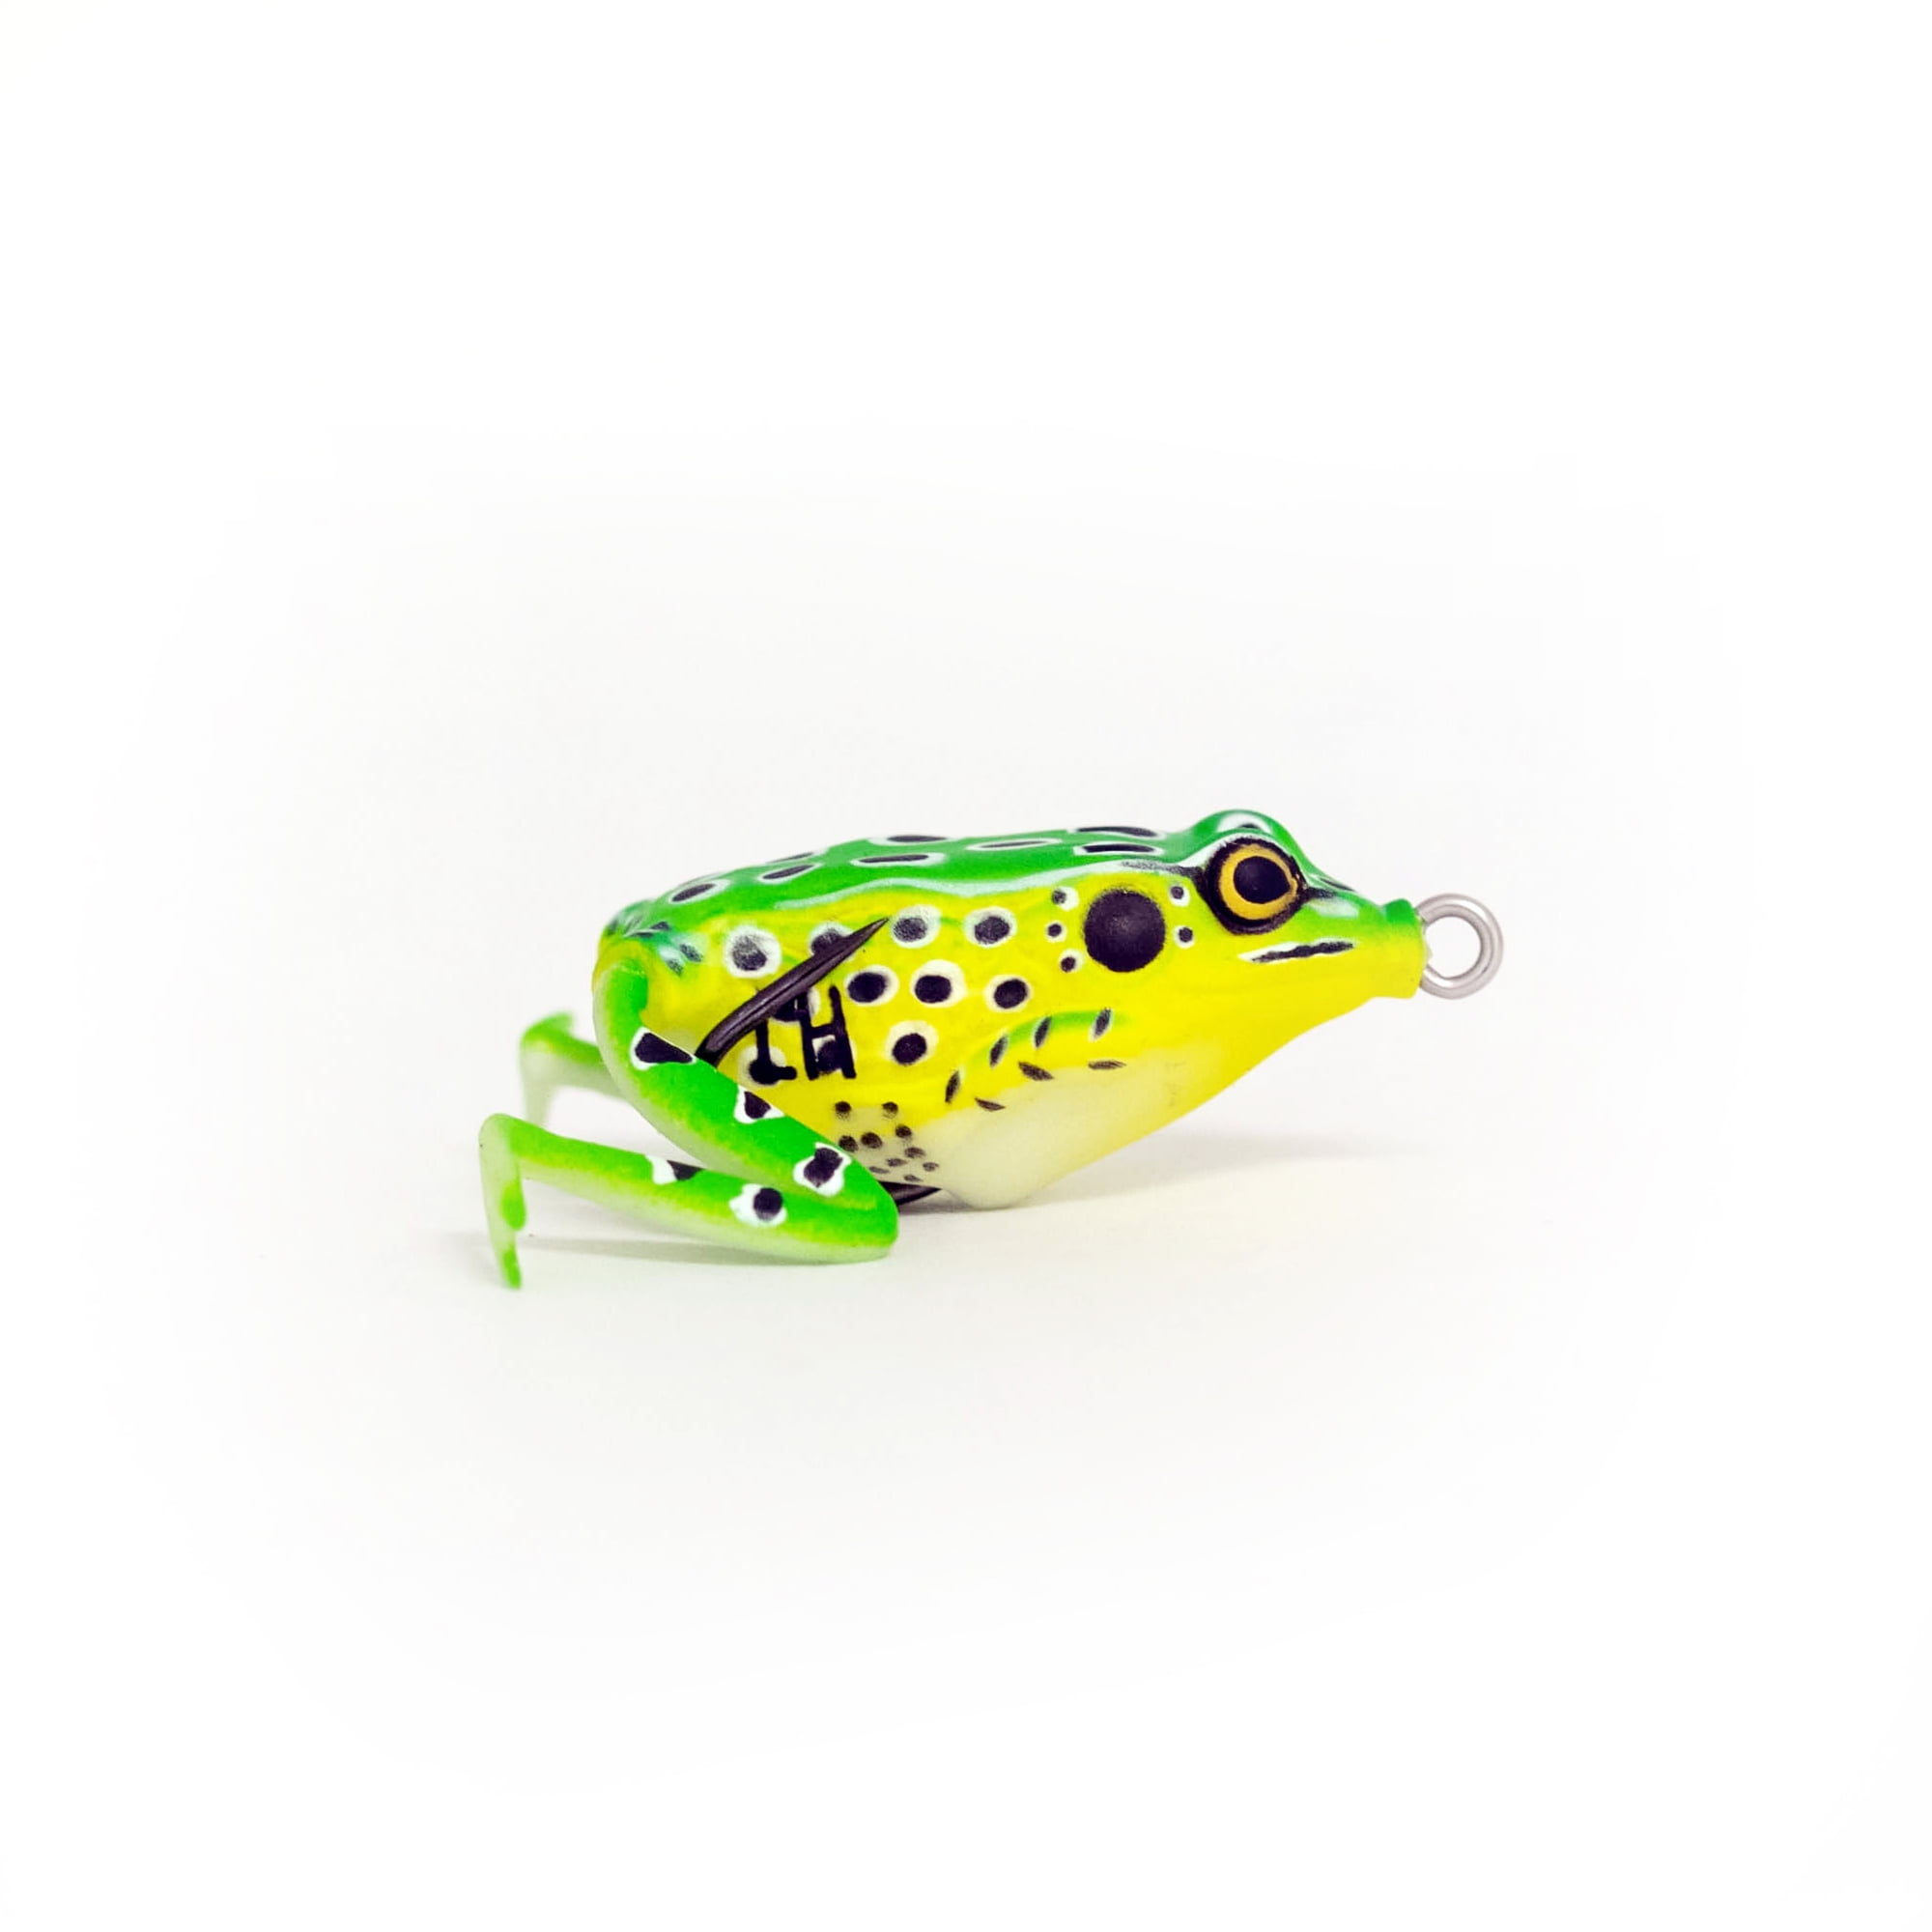 Lunkerhunt Pocket Frog - Topwater Lure - Leopard,1.75in,1/4oz,Soft  Baits,Fishing Lures 